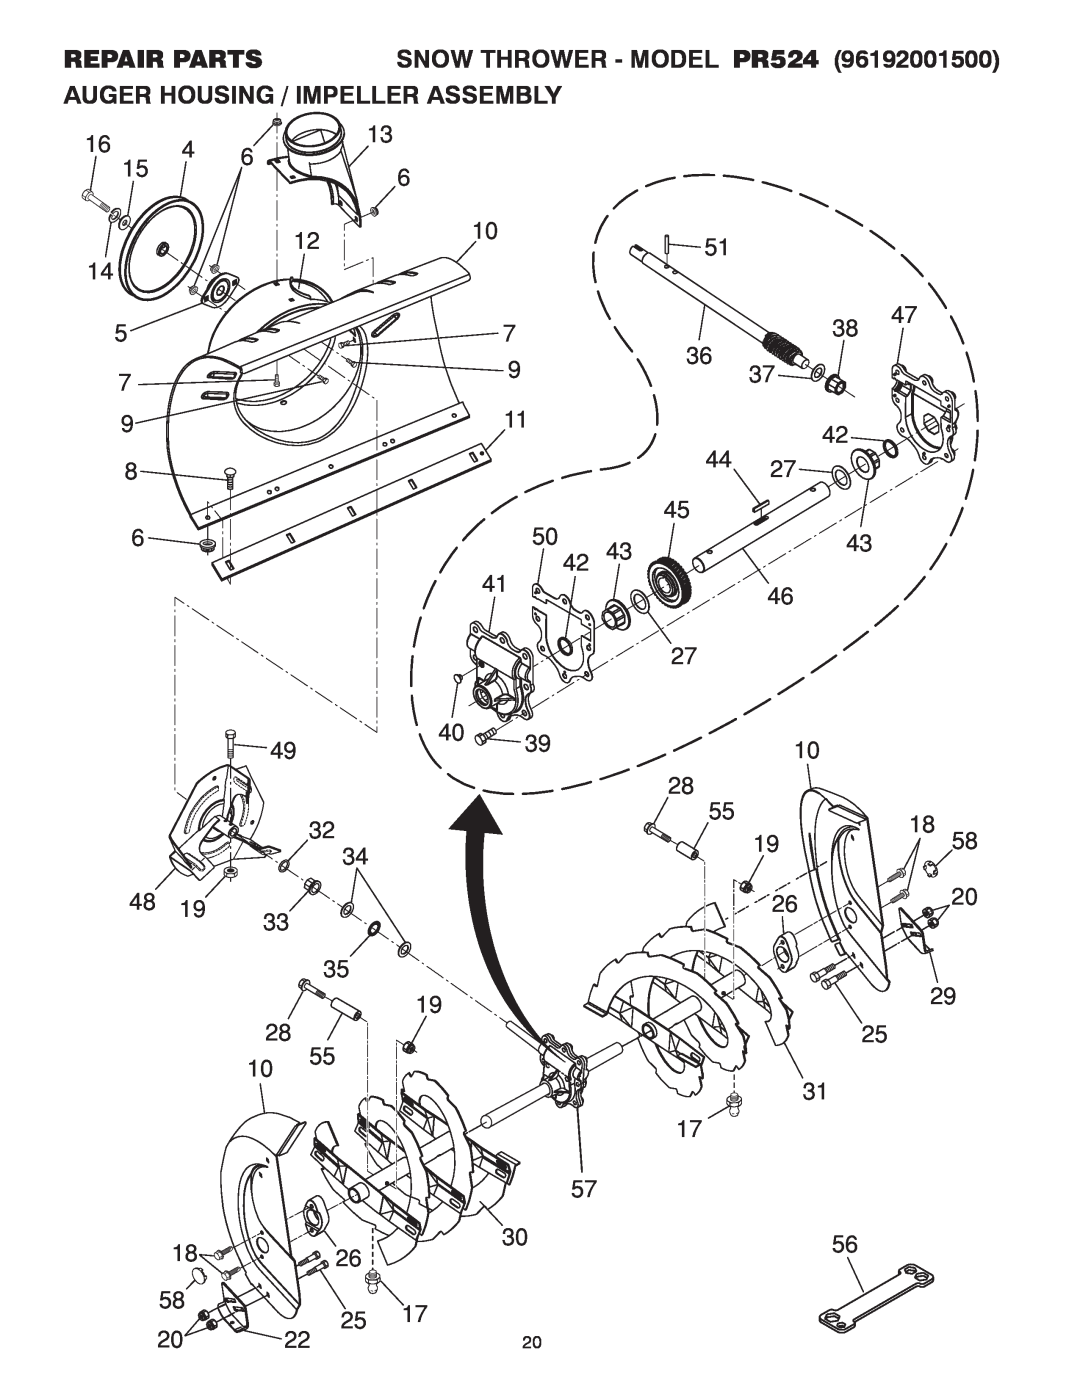 Poulan 414639 owner manual Repair Parts, SNOW THROWER - MODEL PR524, Auger Housing / Impeller Assembly 